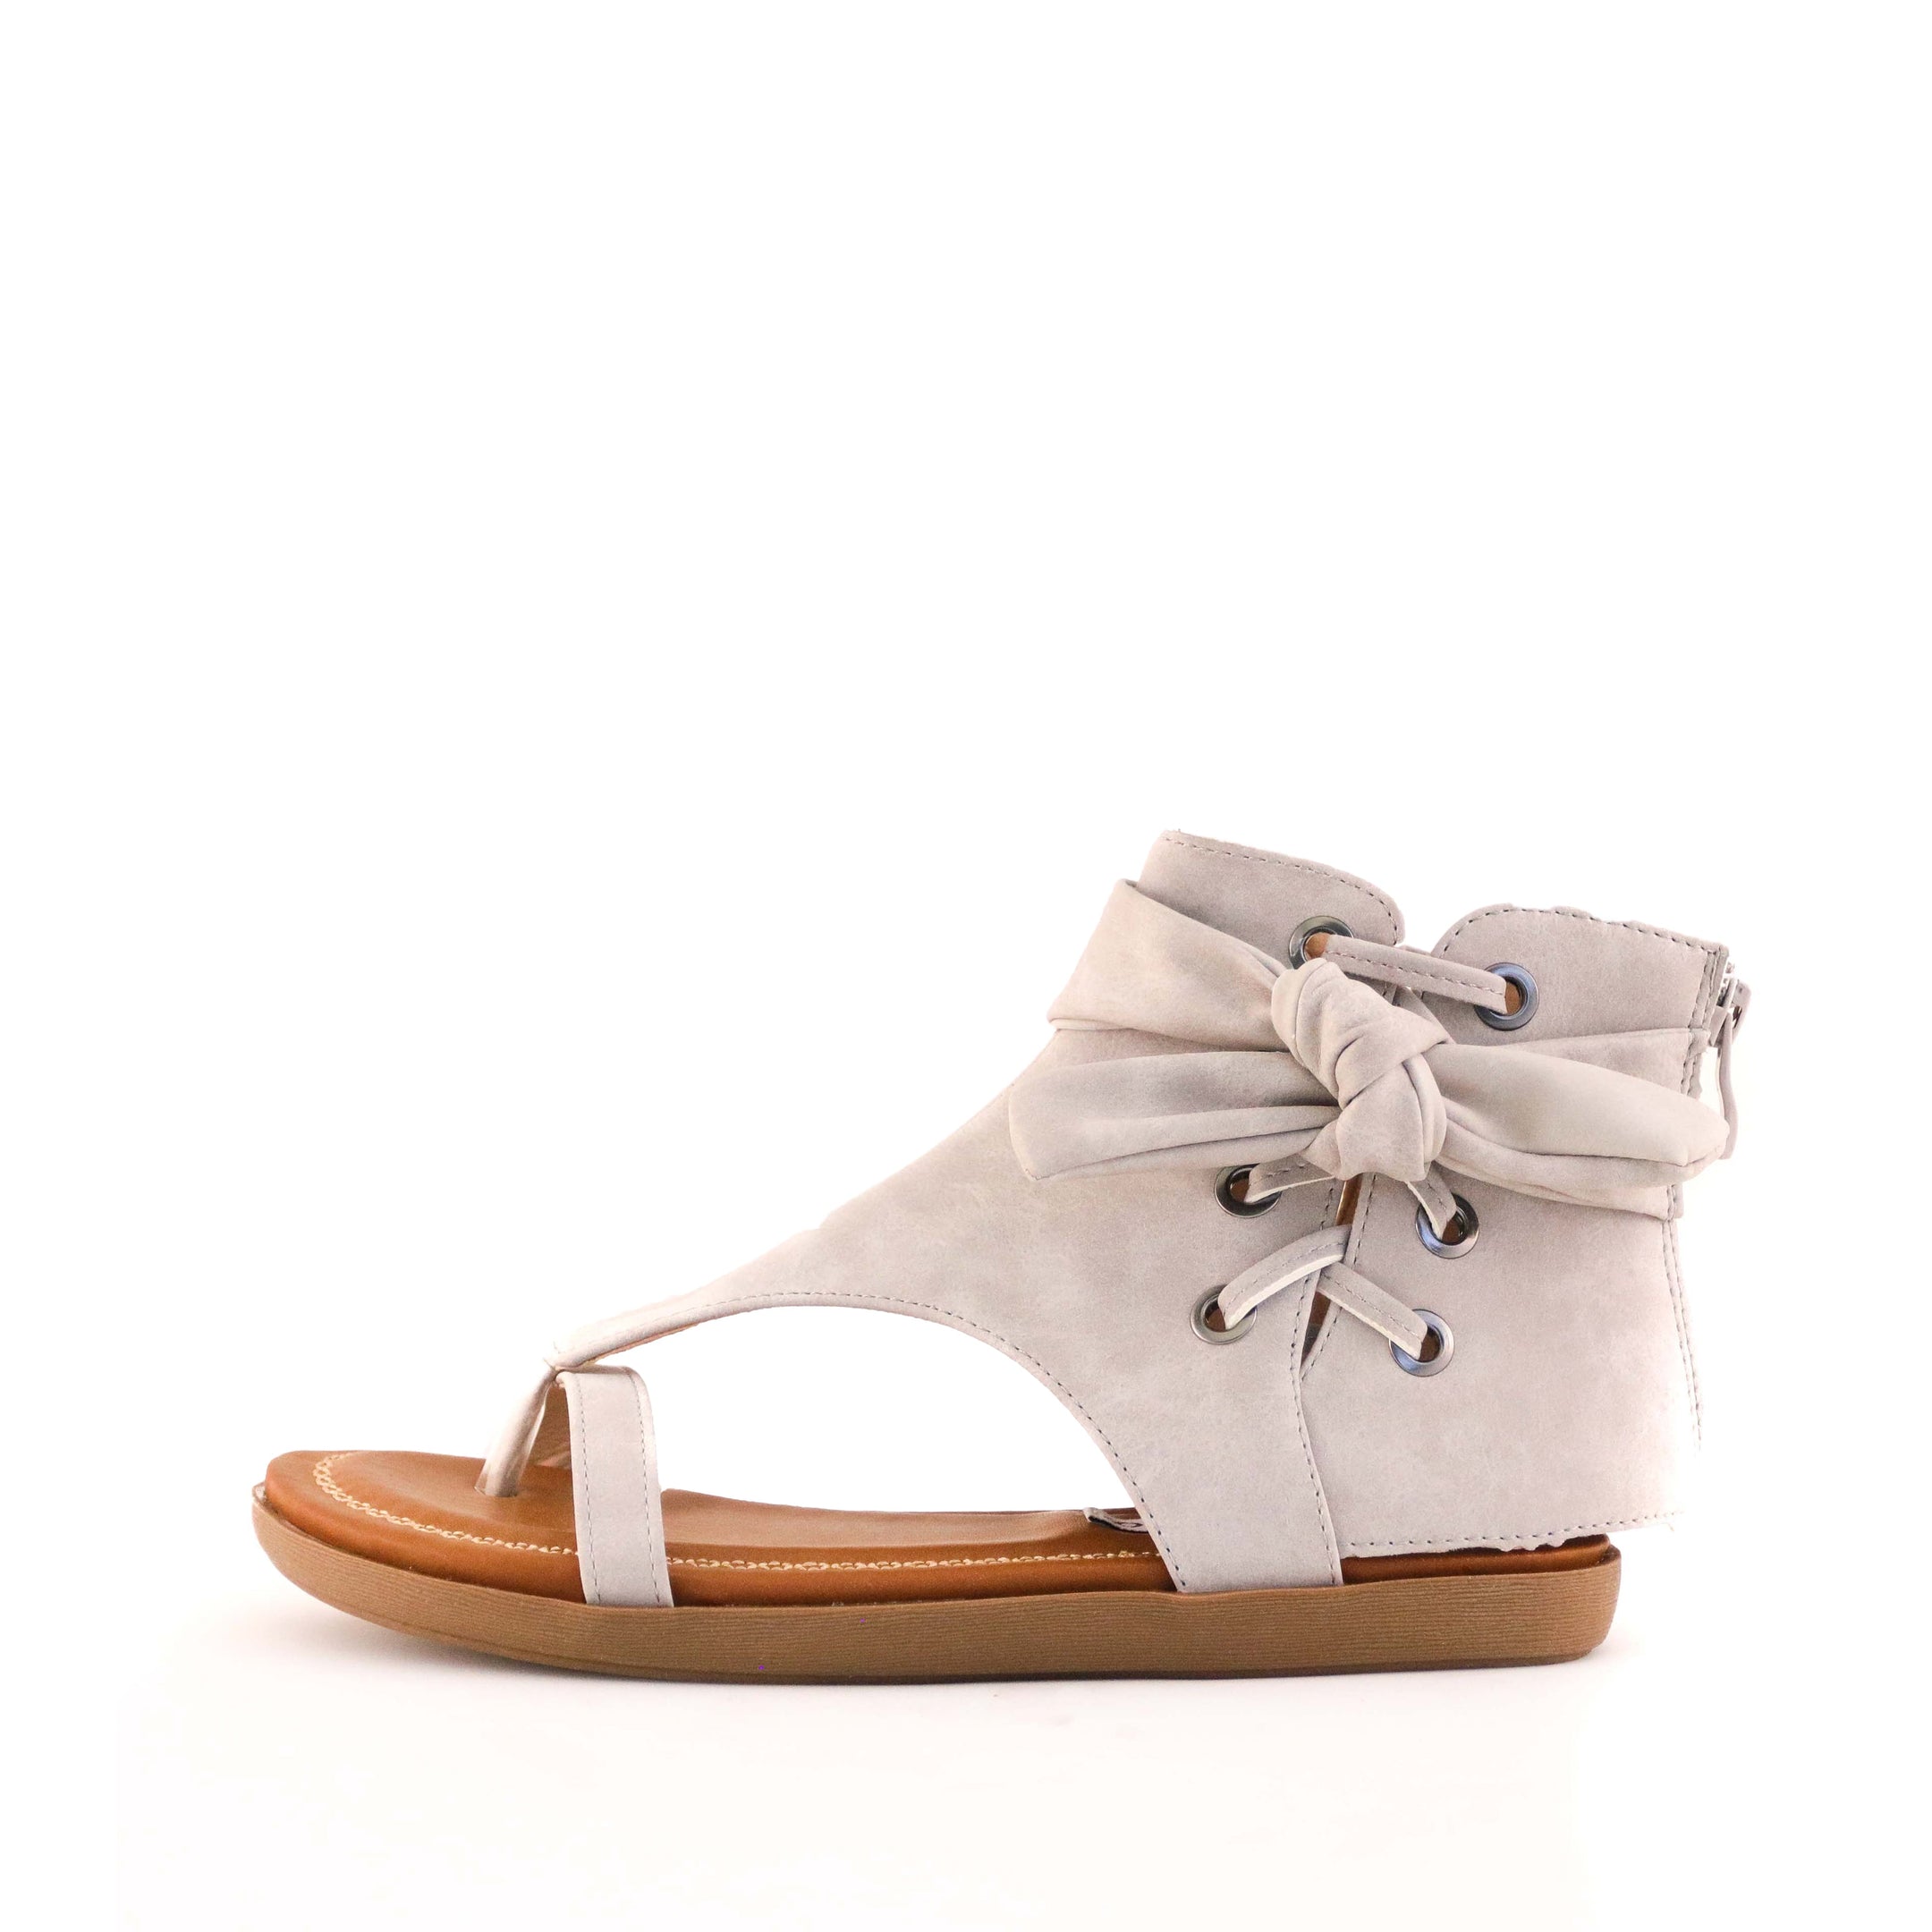 Buy Women's Chi Lace Detail Gladiator Sandal Stone by Nest Shoes